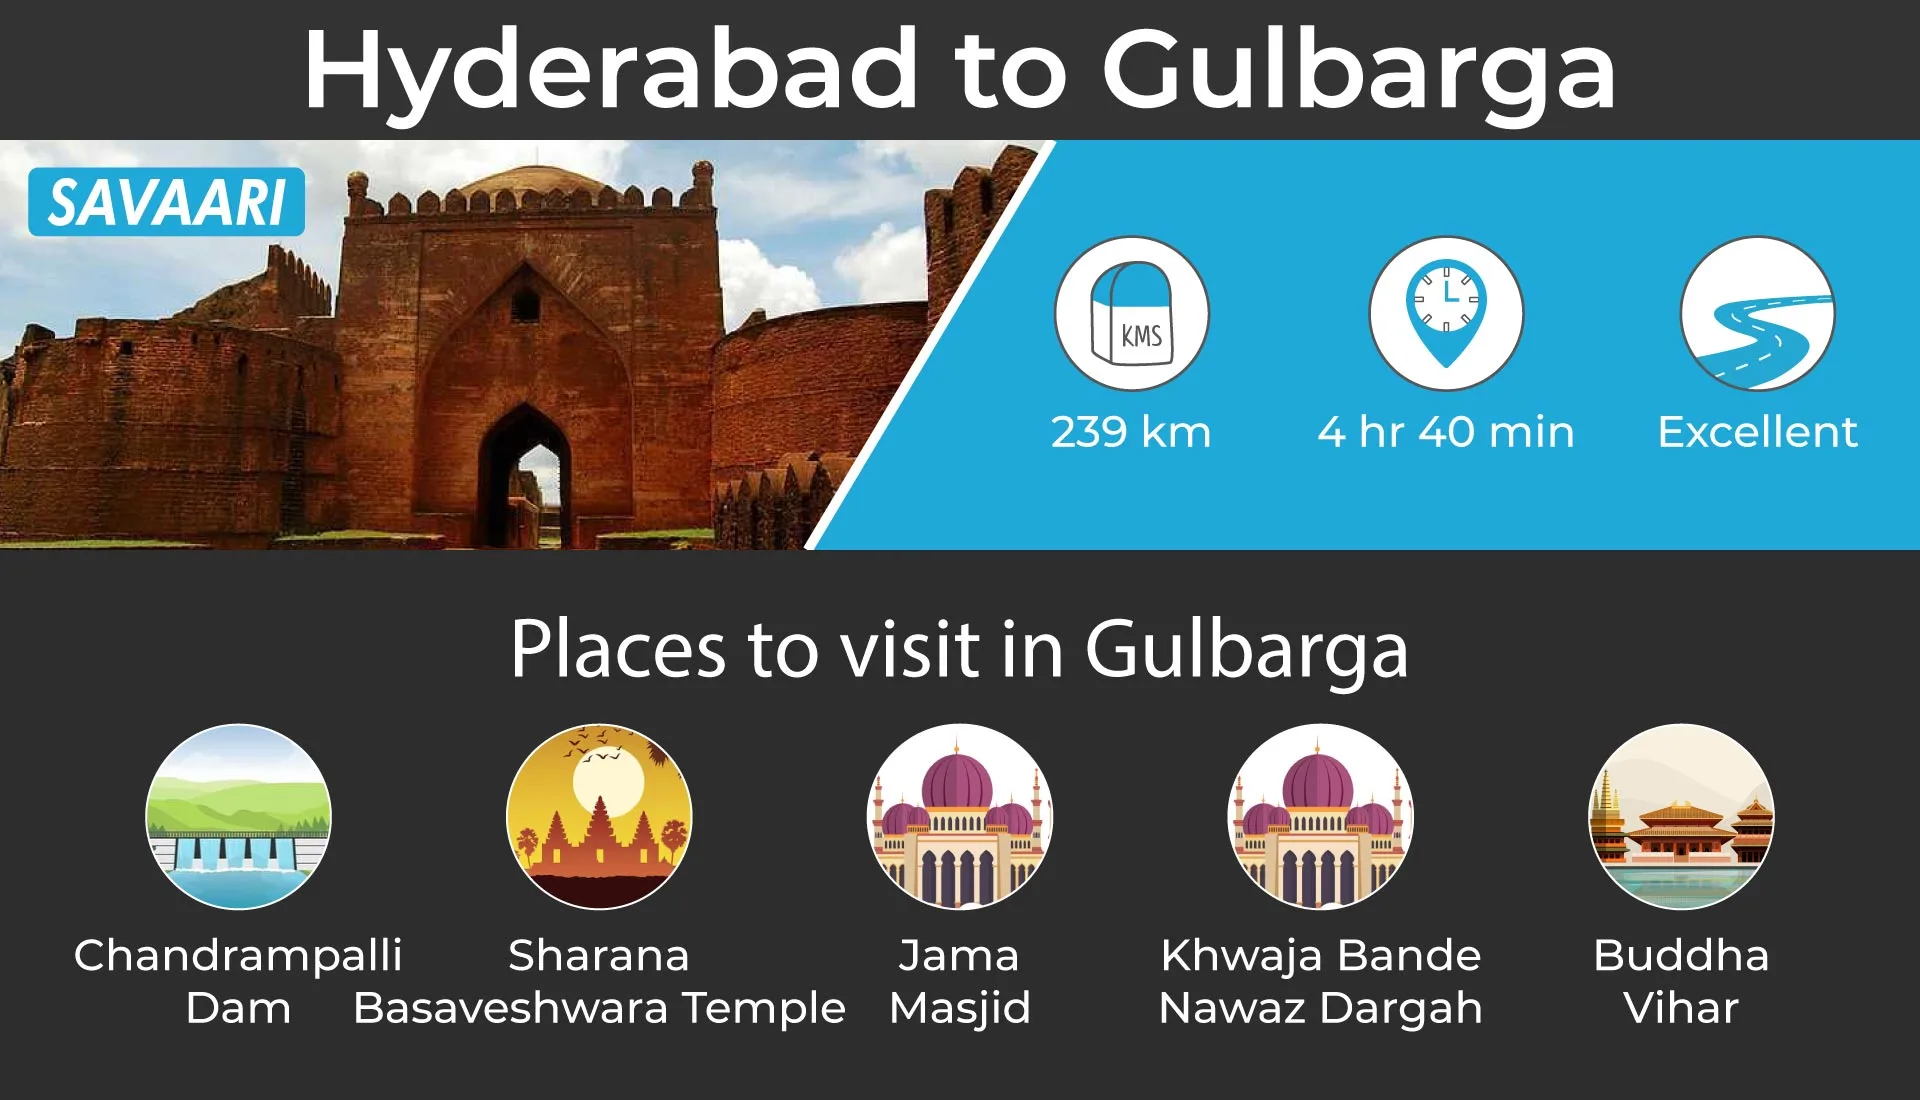 Places to visit near Hyderabad